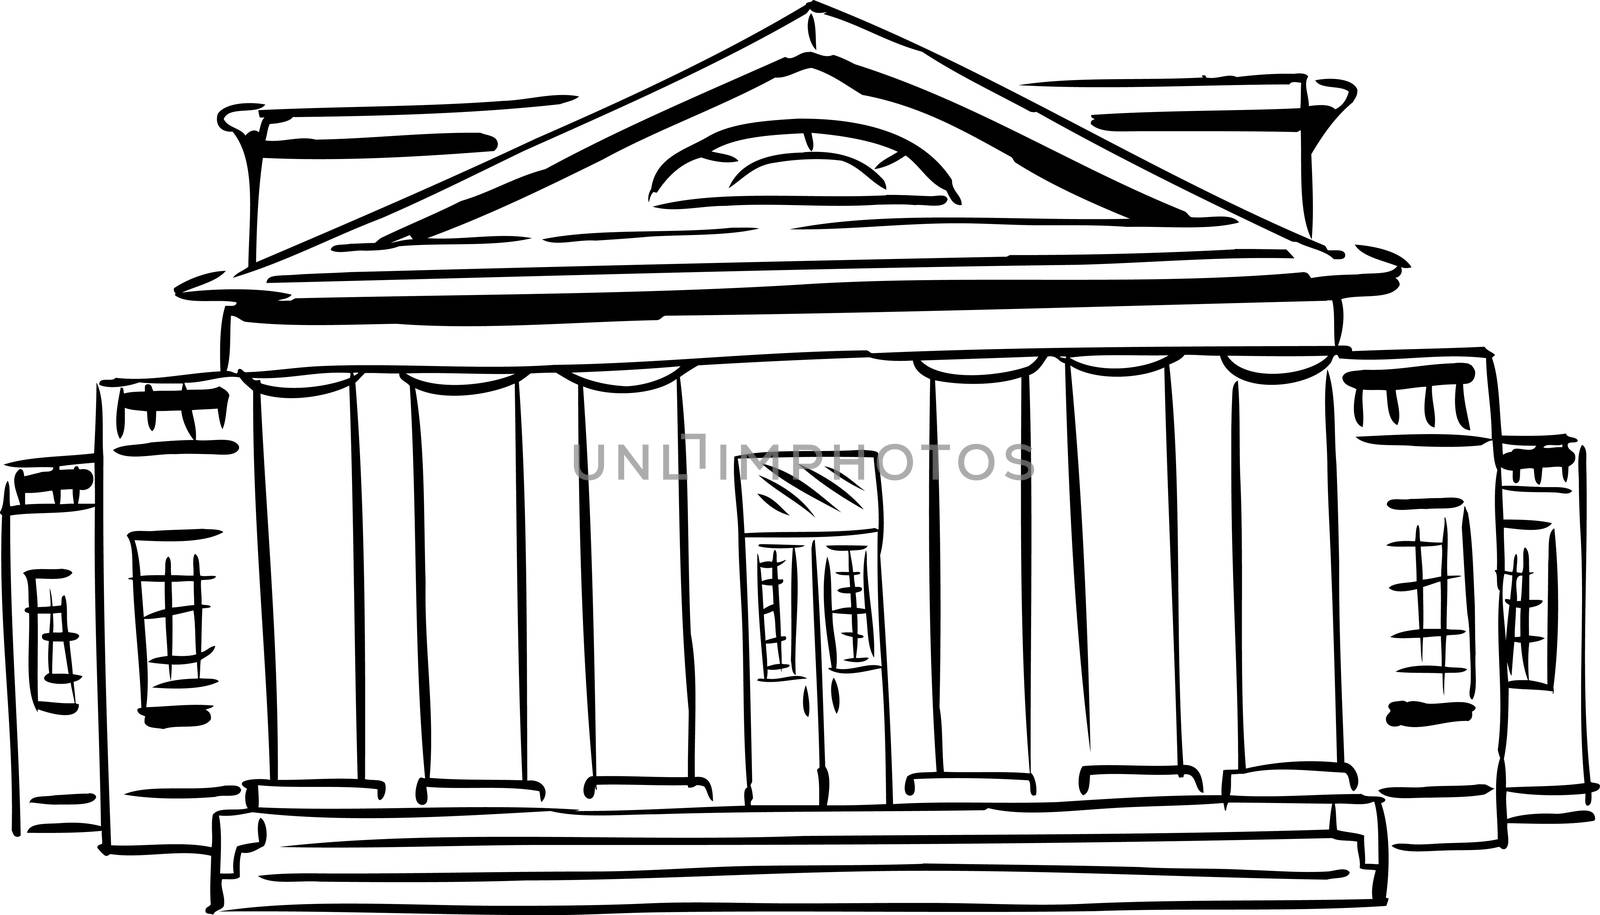 Outlined building with columns by TheBlackRhino